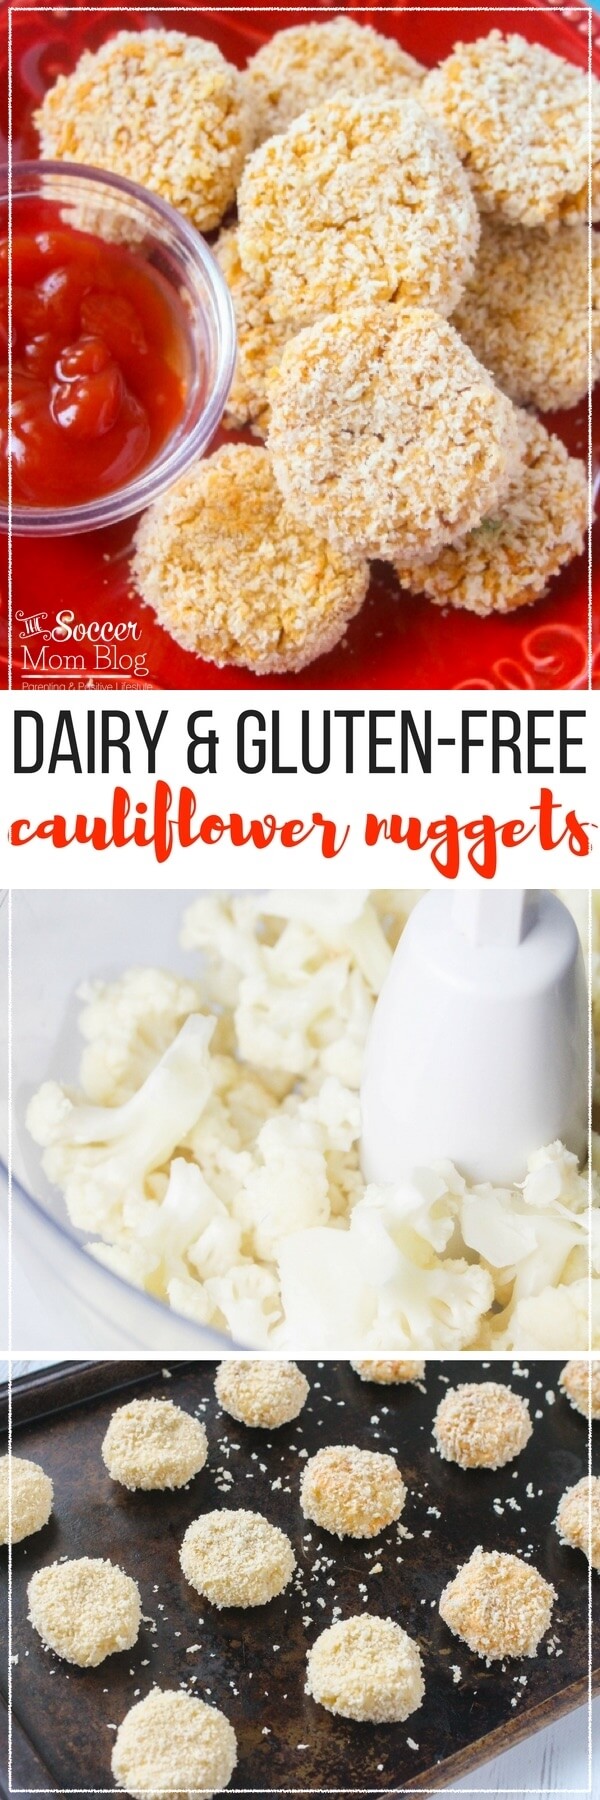 Healthy Cauliflower Nuggets are a sneaky way to get kids to eat more vegetables! Gluten free & dairy free, with that golden crispy texture you'll ALL love!